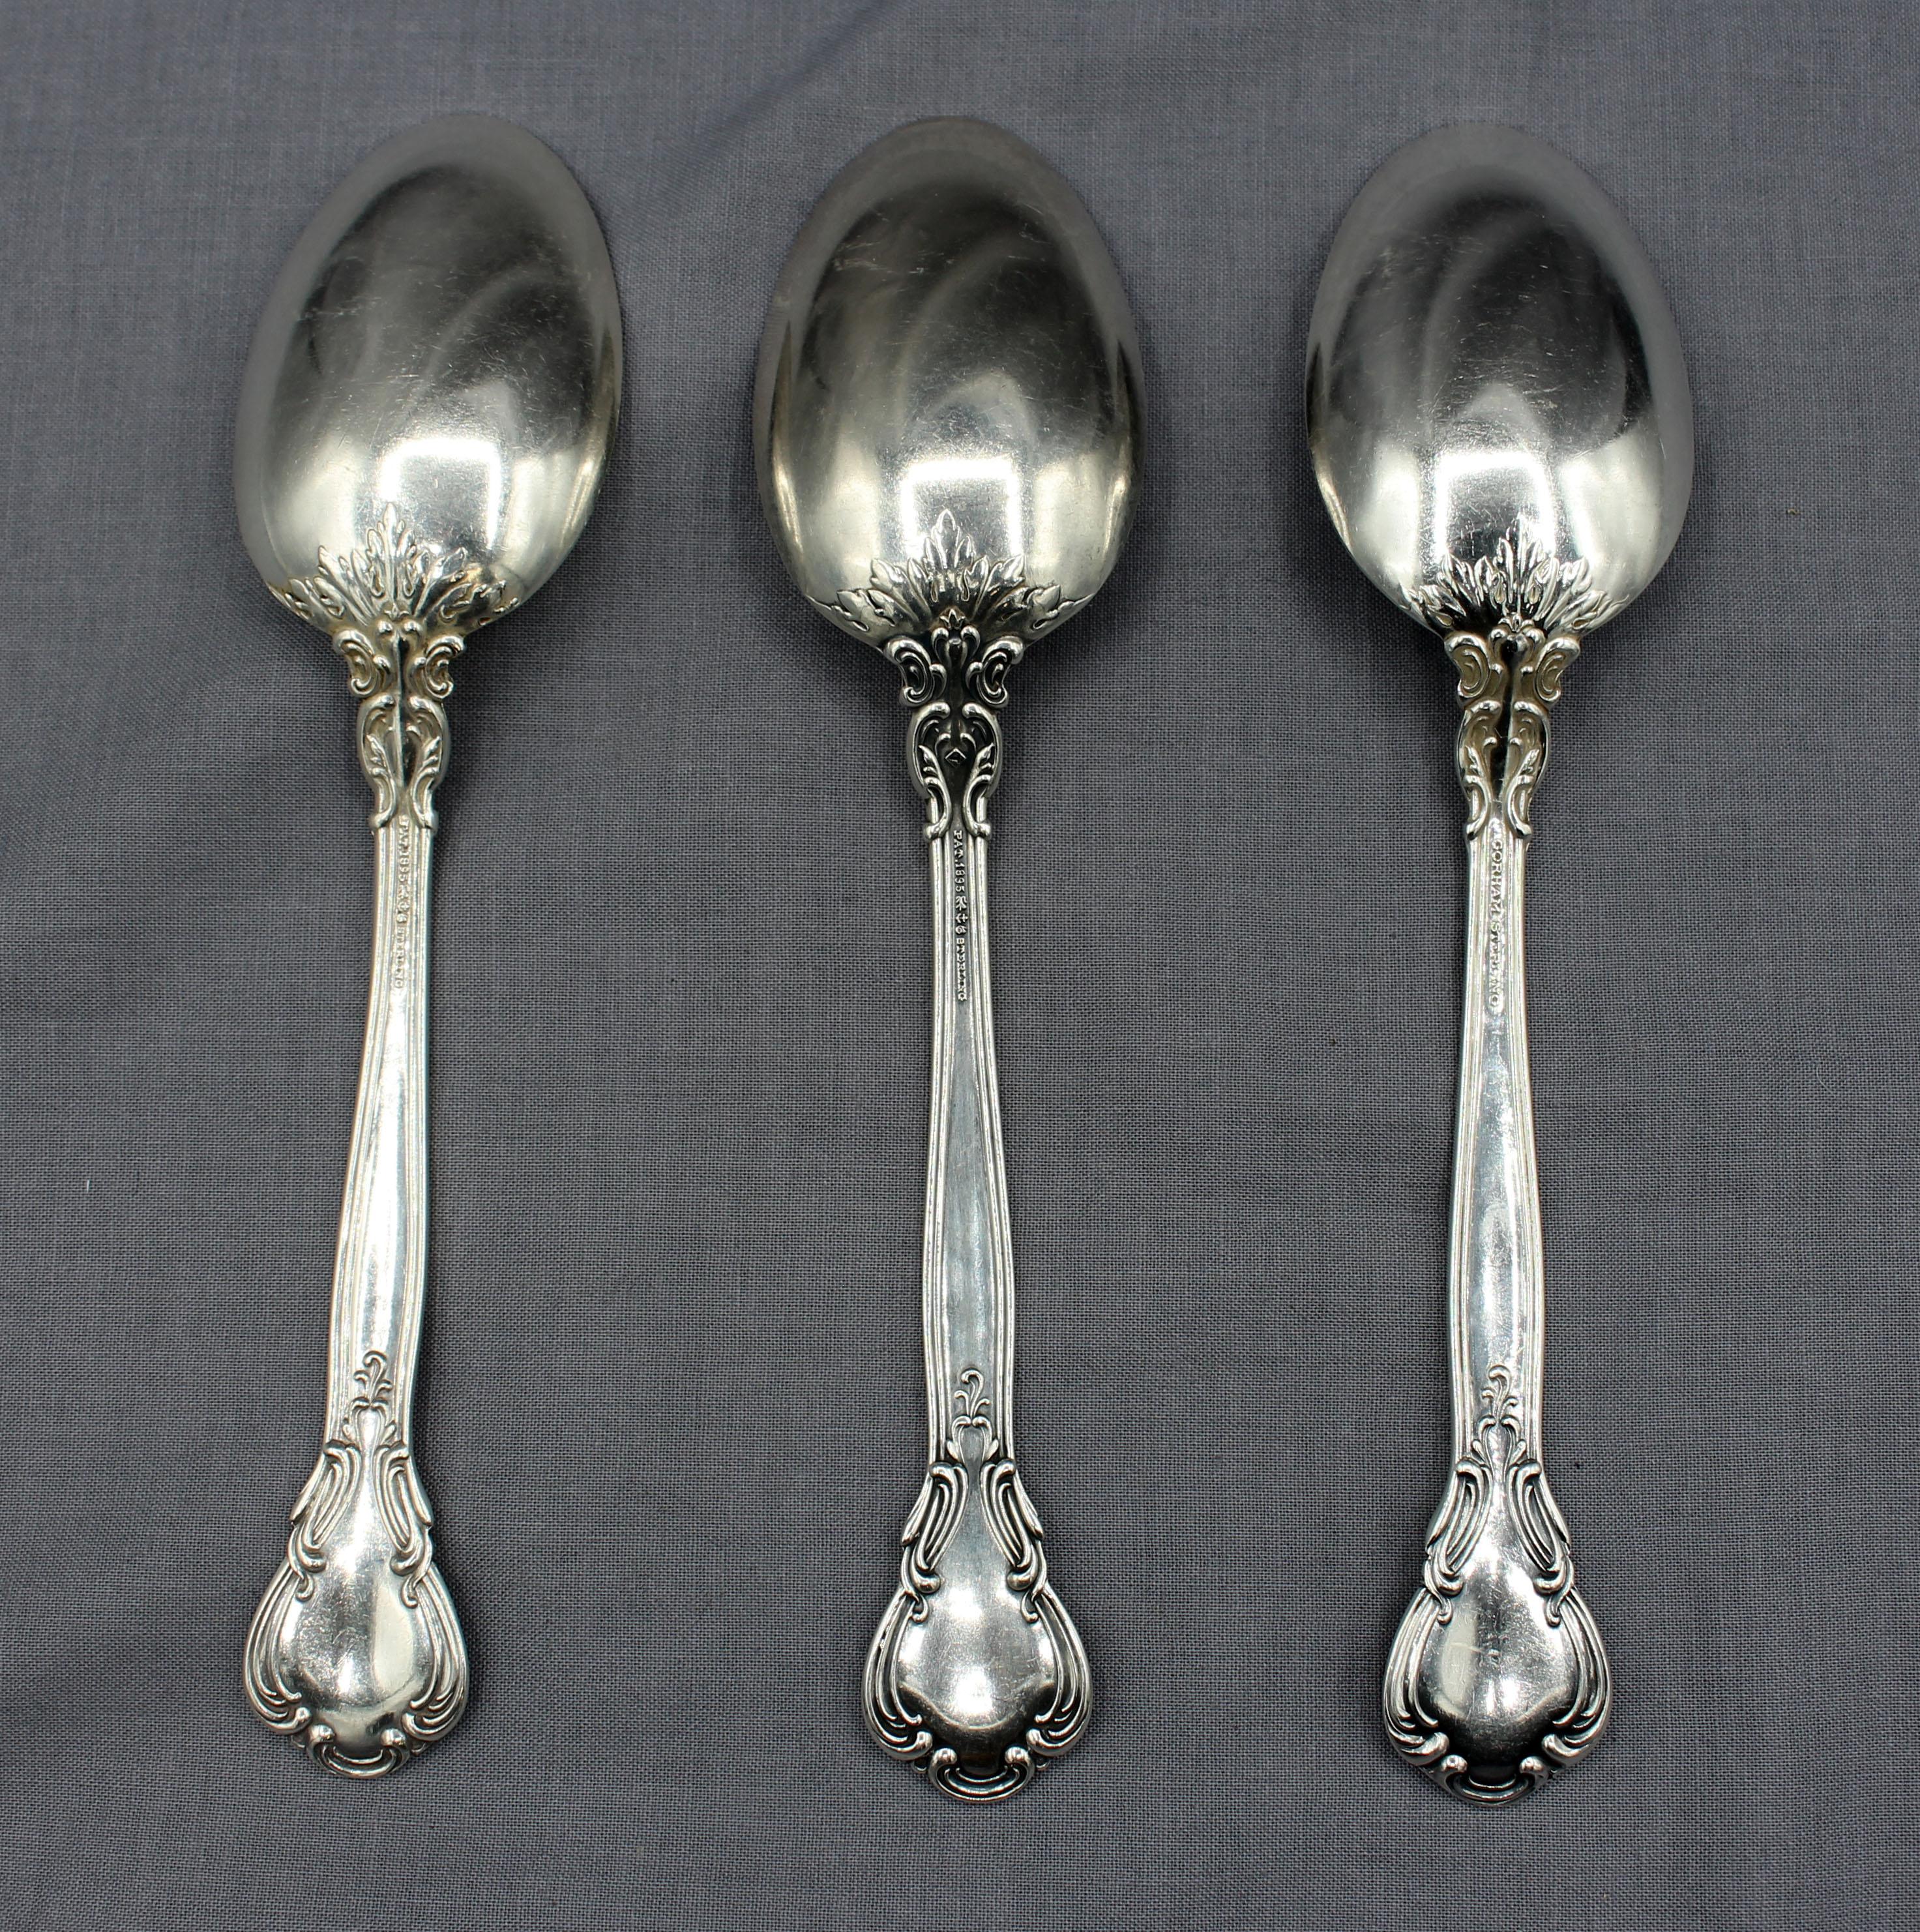 Lot of 3 Chantilly sterling silver dessert spoons by Gorham, early 20th century. A larger antique spoons form. 1 with monogram. 4.10 troy oz.
7